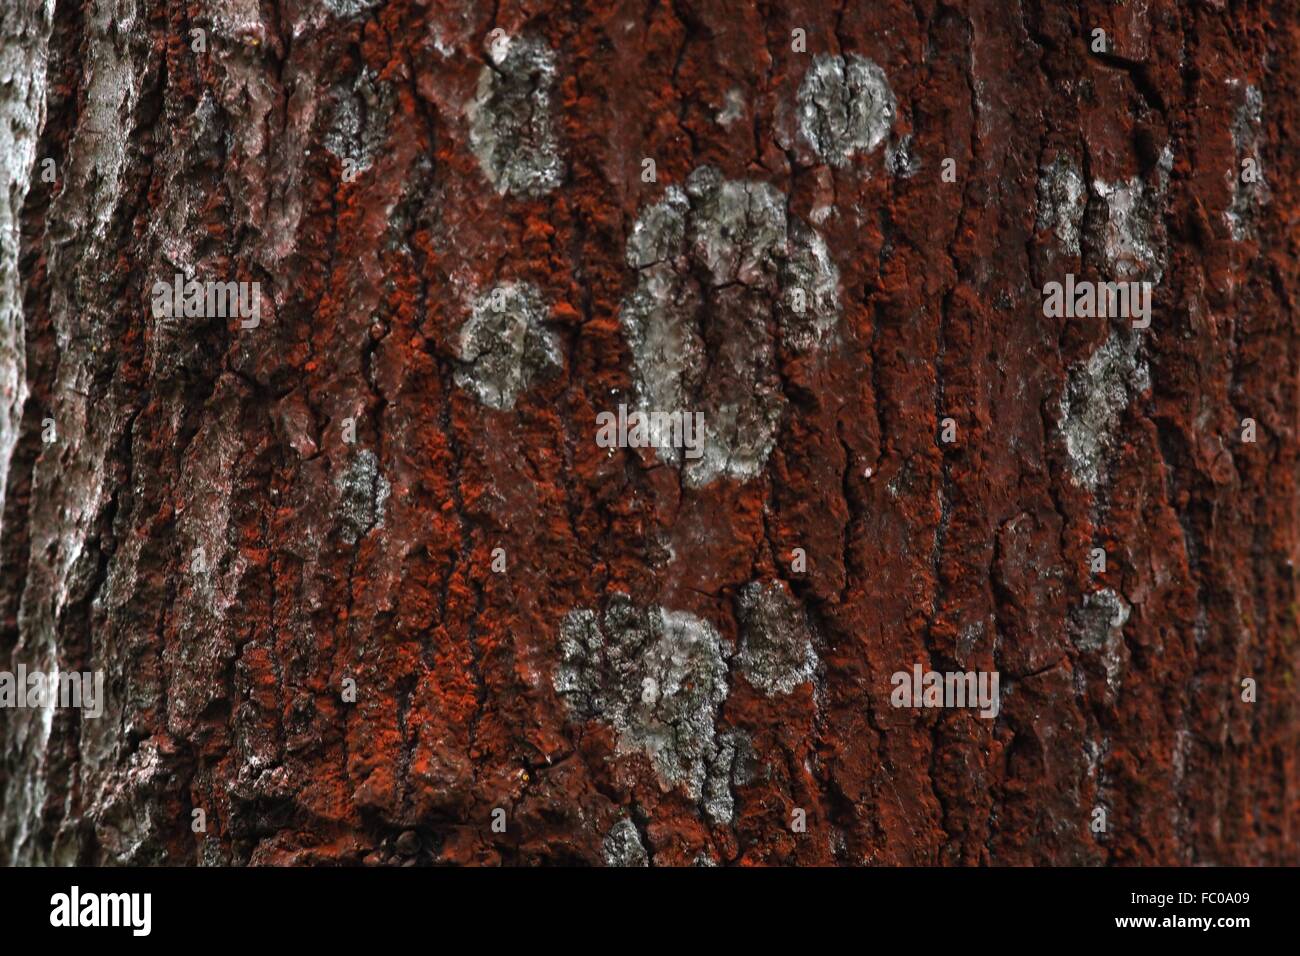 red and grey lichen on bork Stock Photo